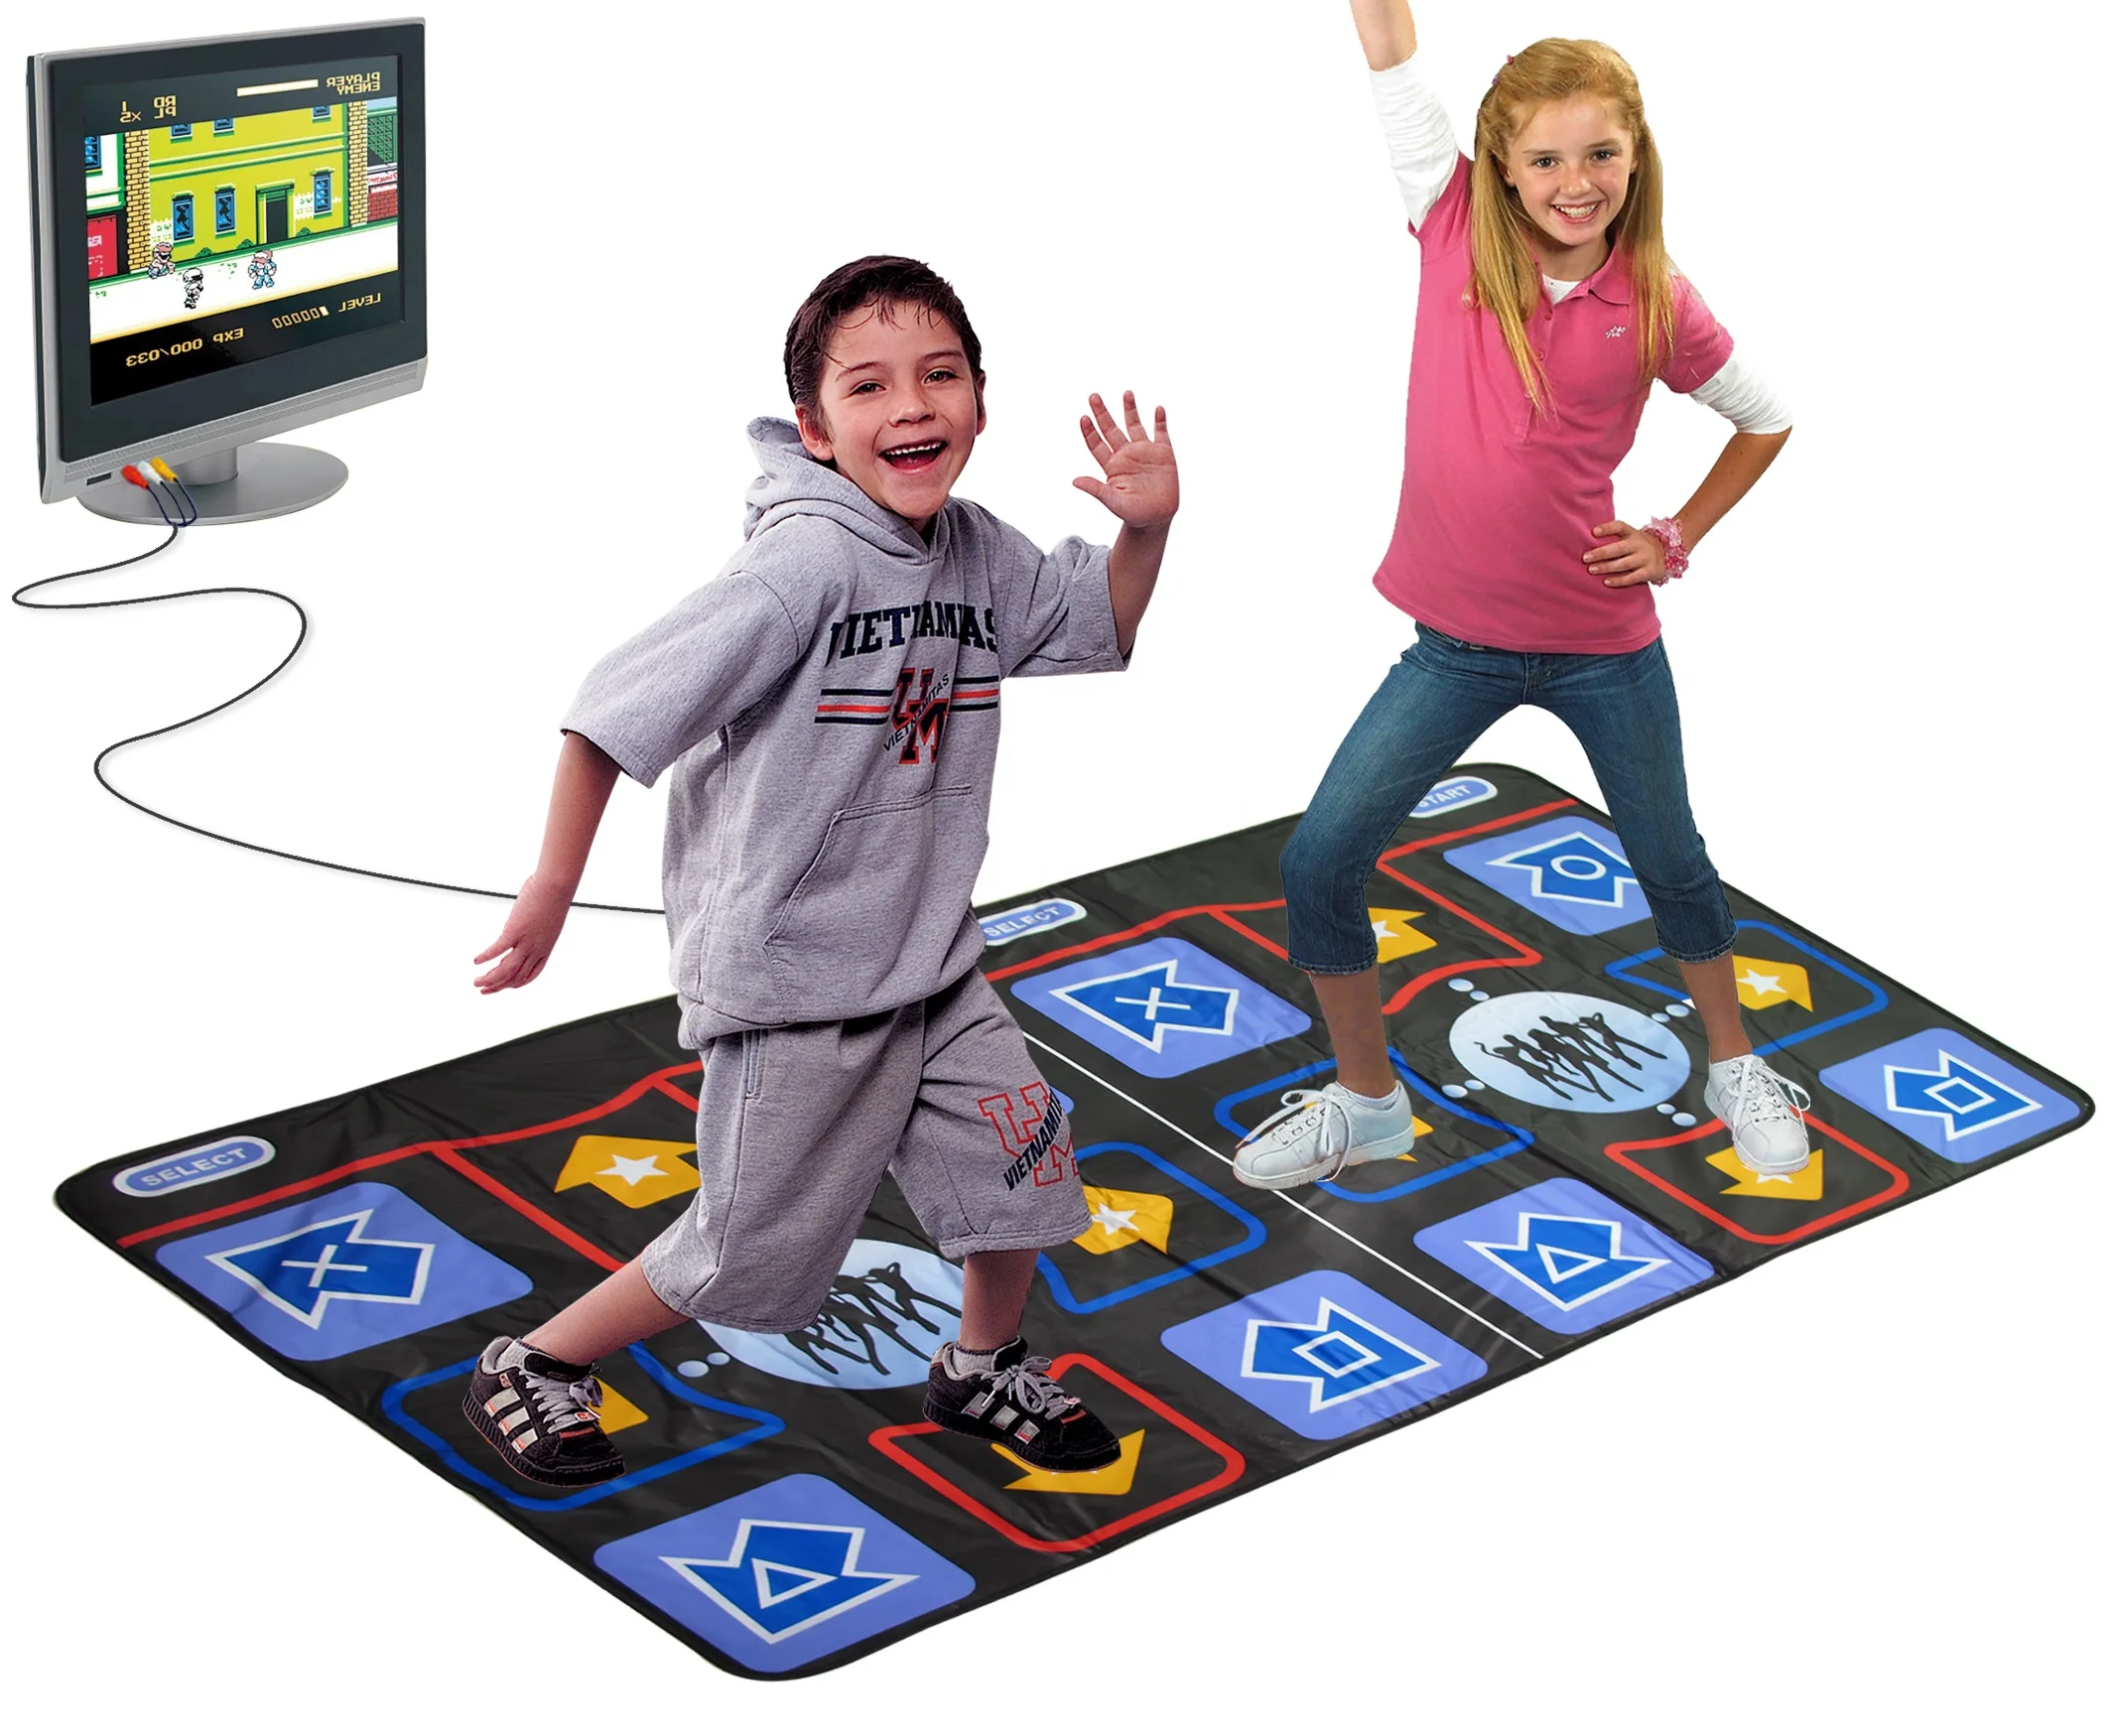 Electronic Mat Plug And Play Tv Game Dance Pad Double Dance Mat With 218  Songs Av Output - Buy Tv Game Dance Pad,Electronic Dance Mat,Plug And Play Dance  Mat Product on Alibaba.com